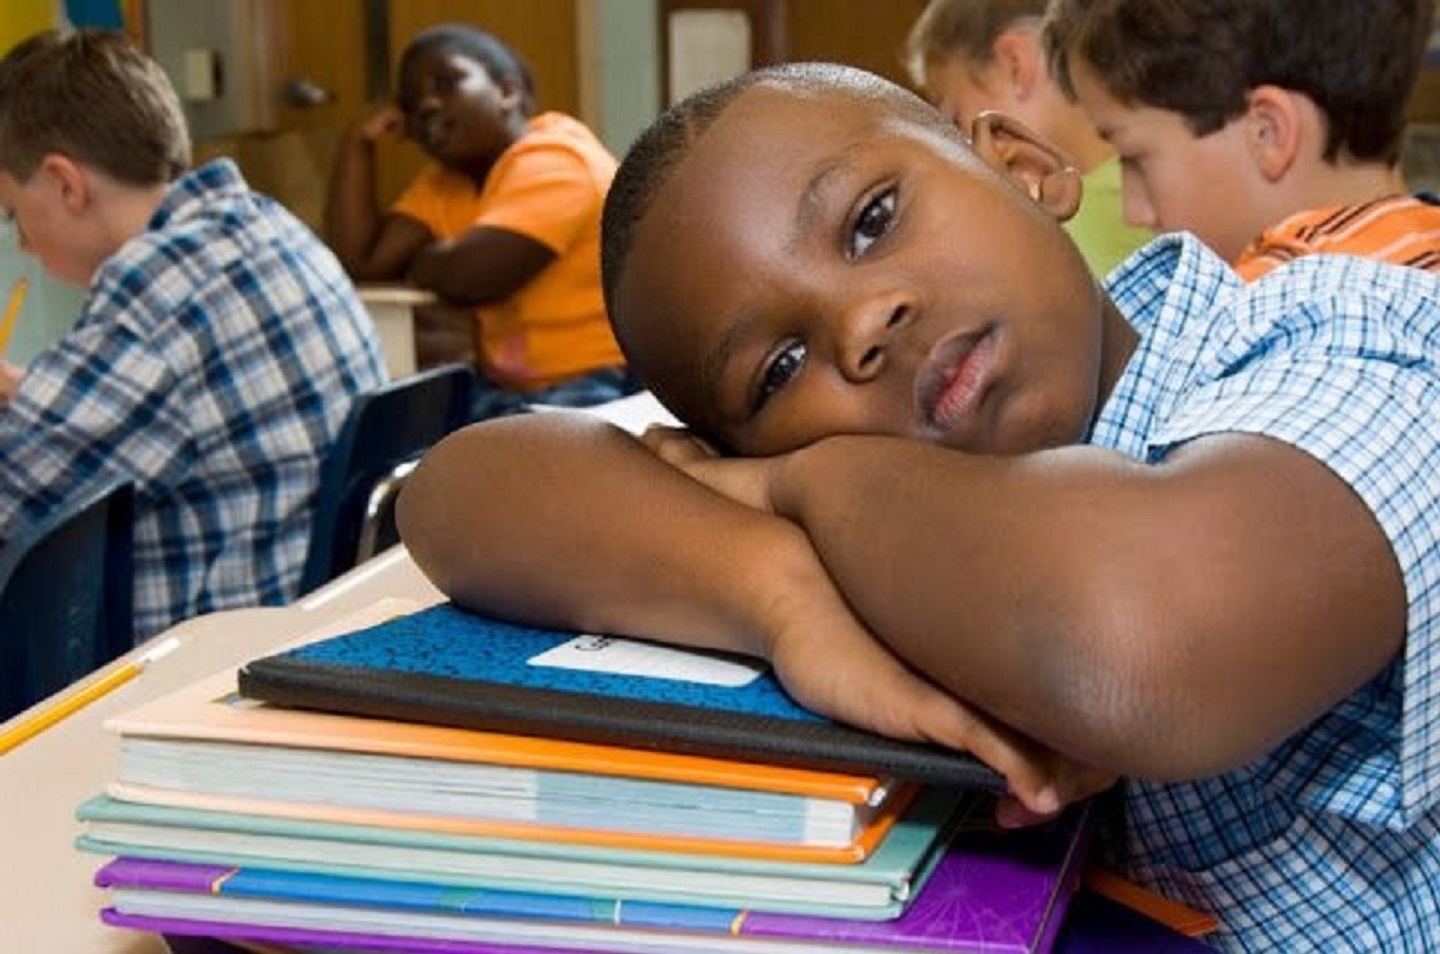 10 Tips to Improve Your Child’s Bad Grades